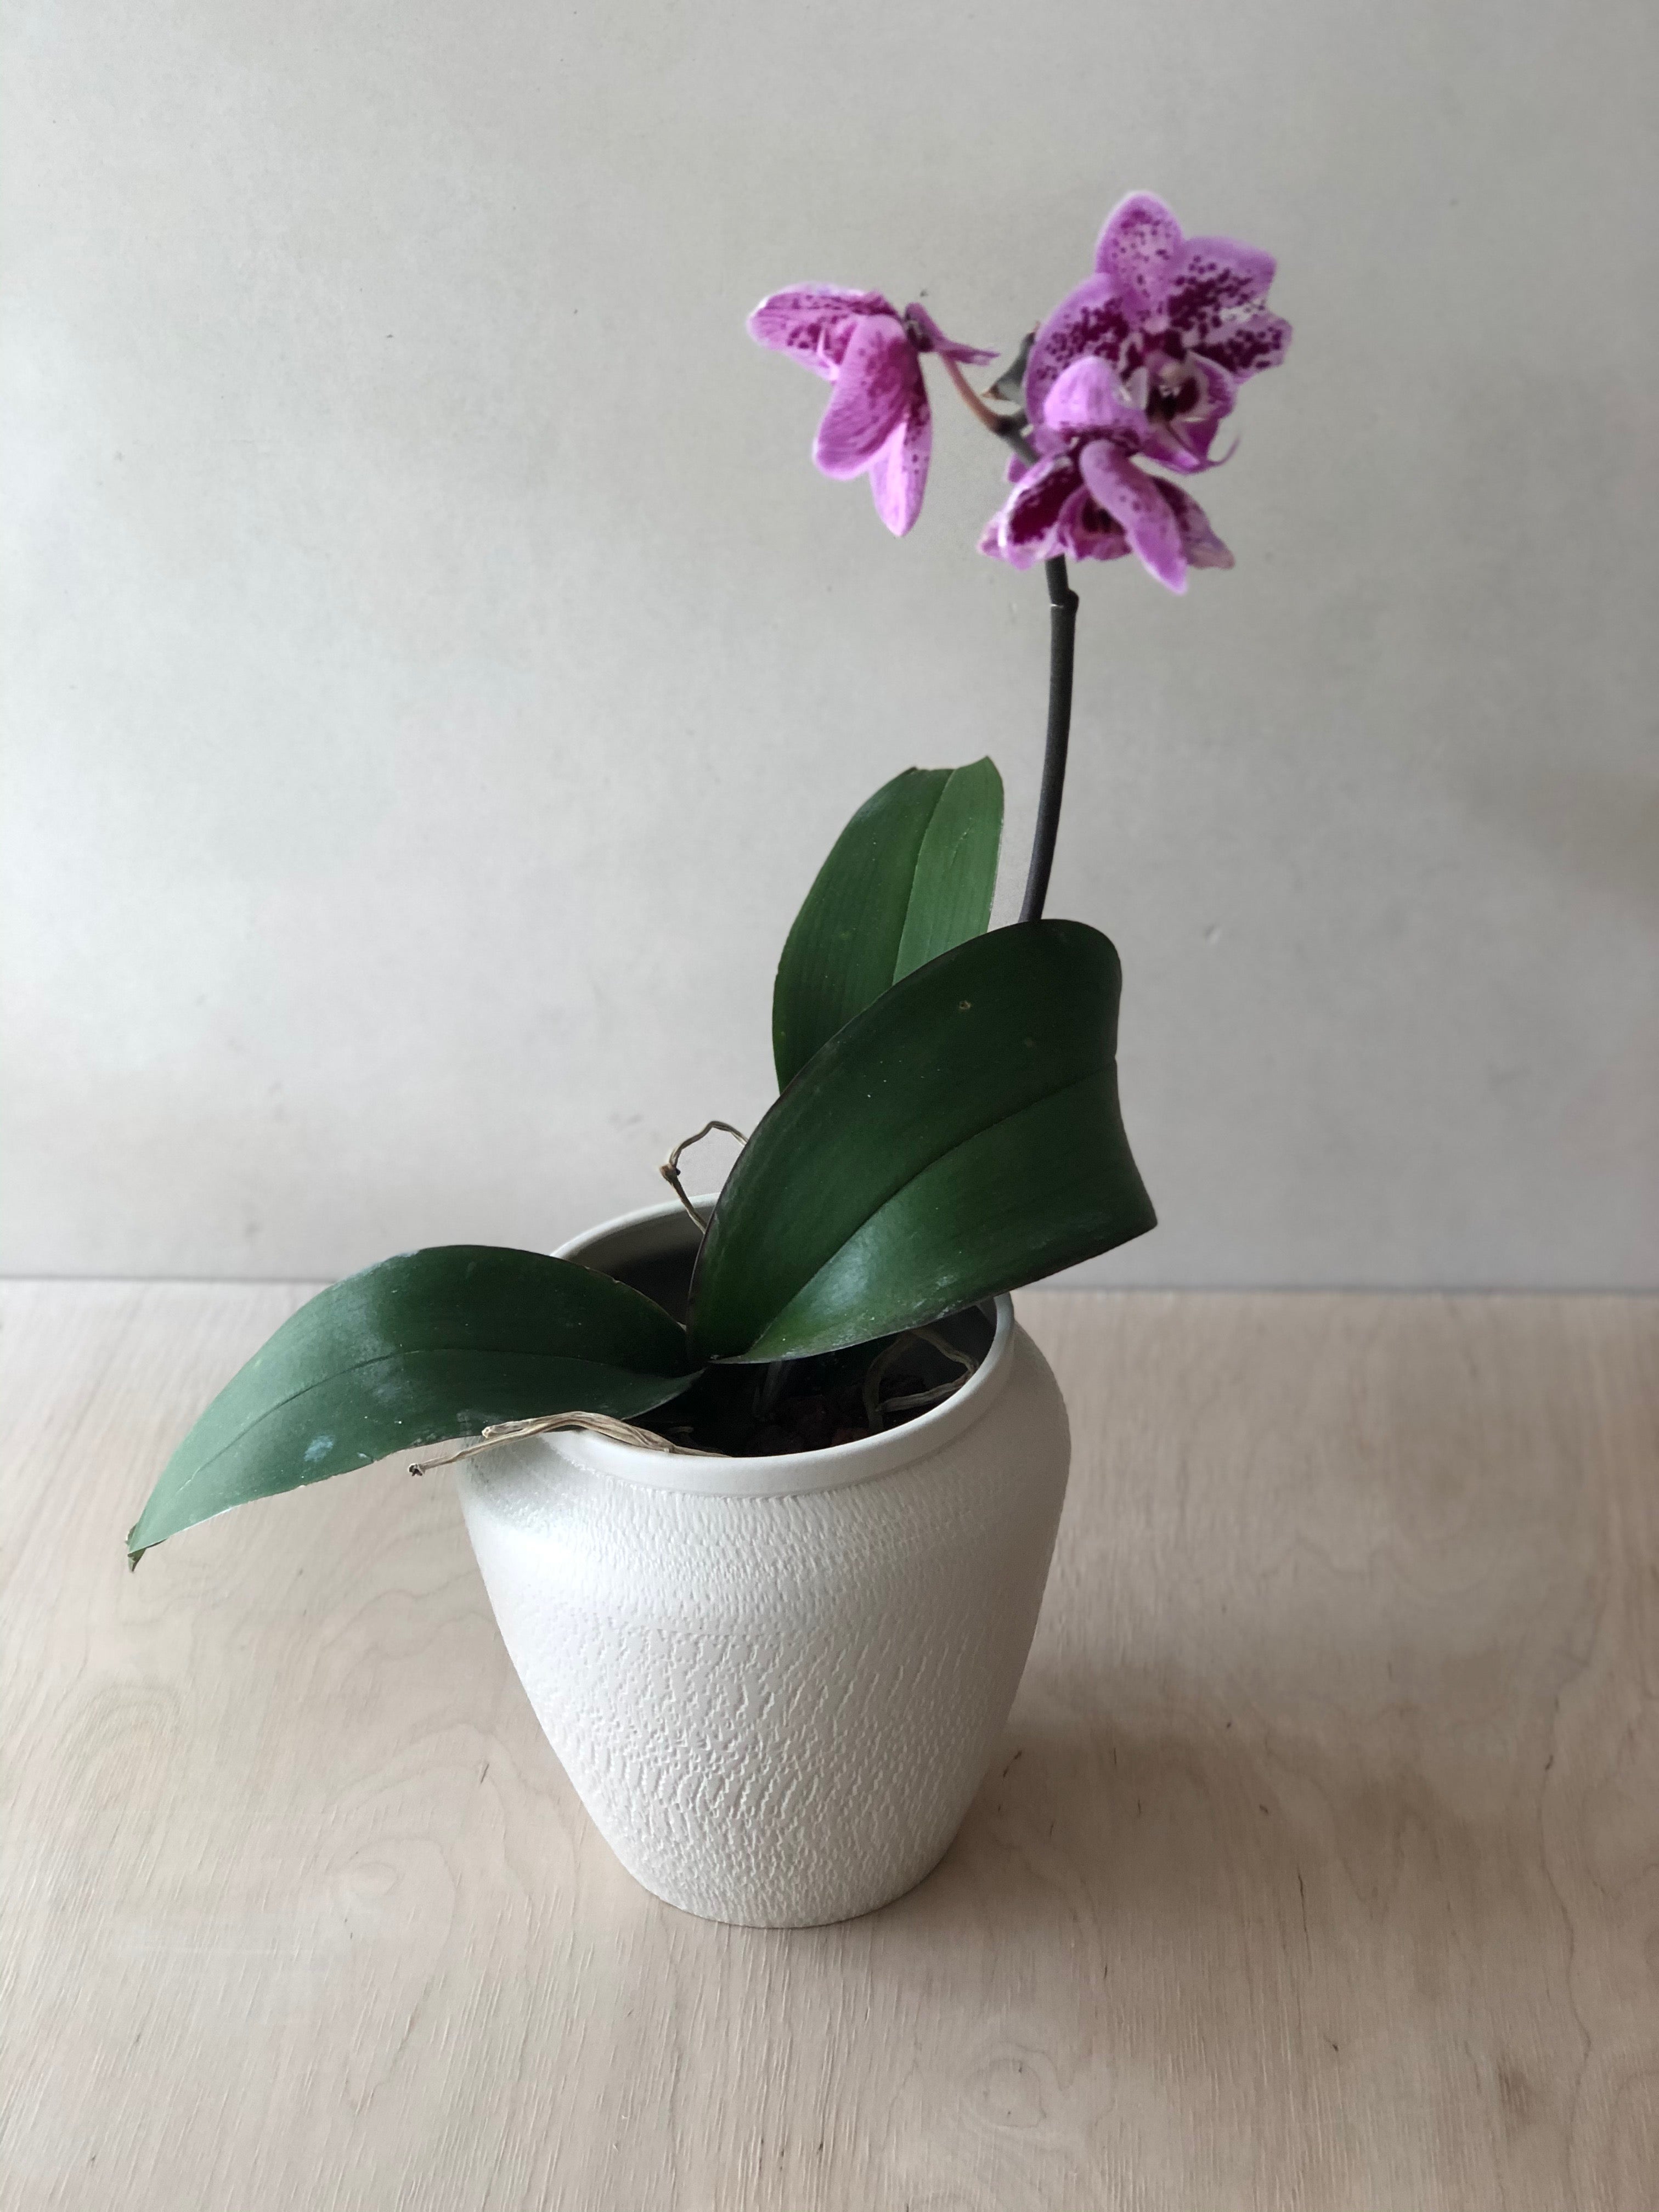 Small white vase with chattering decoration